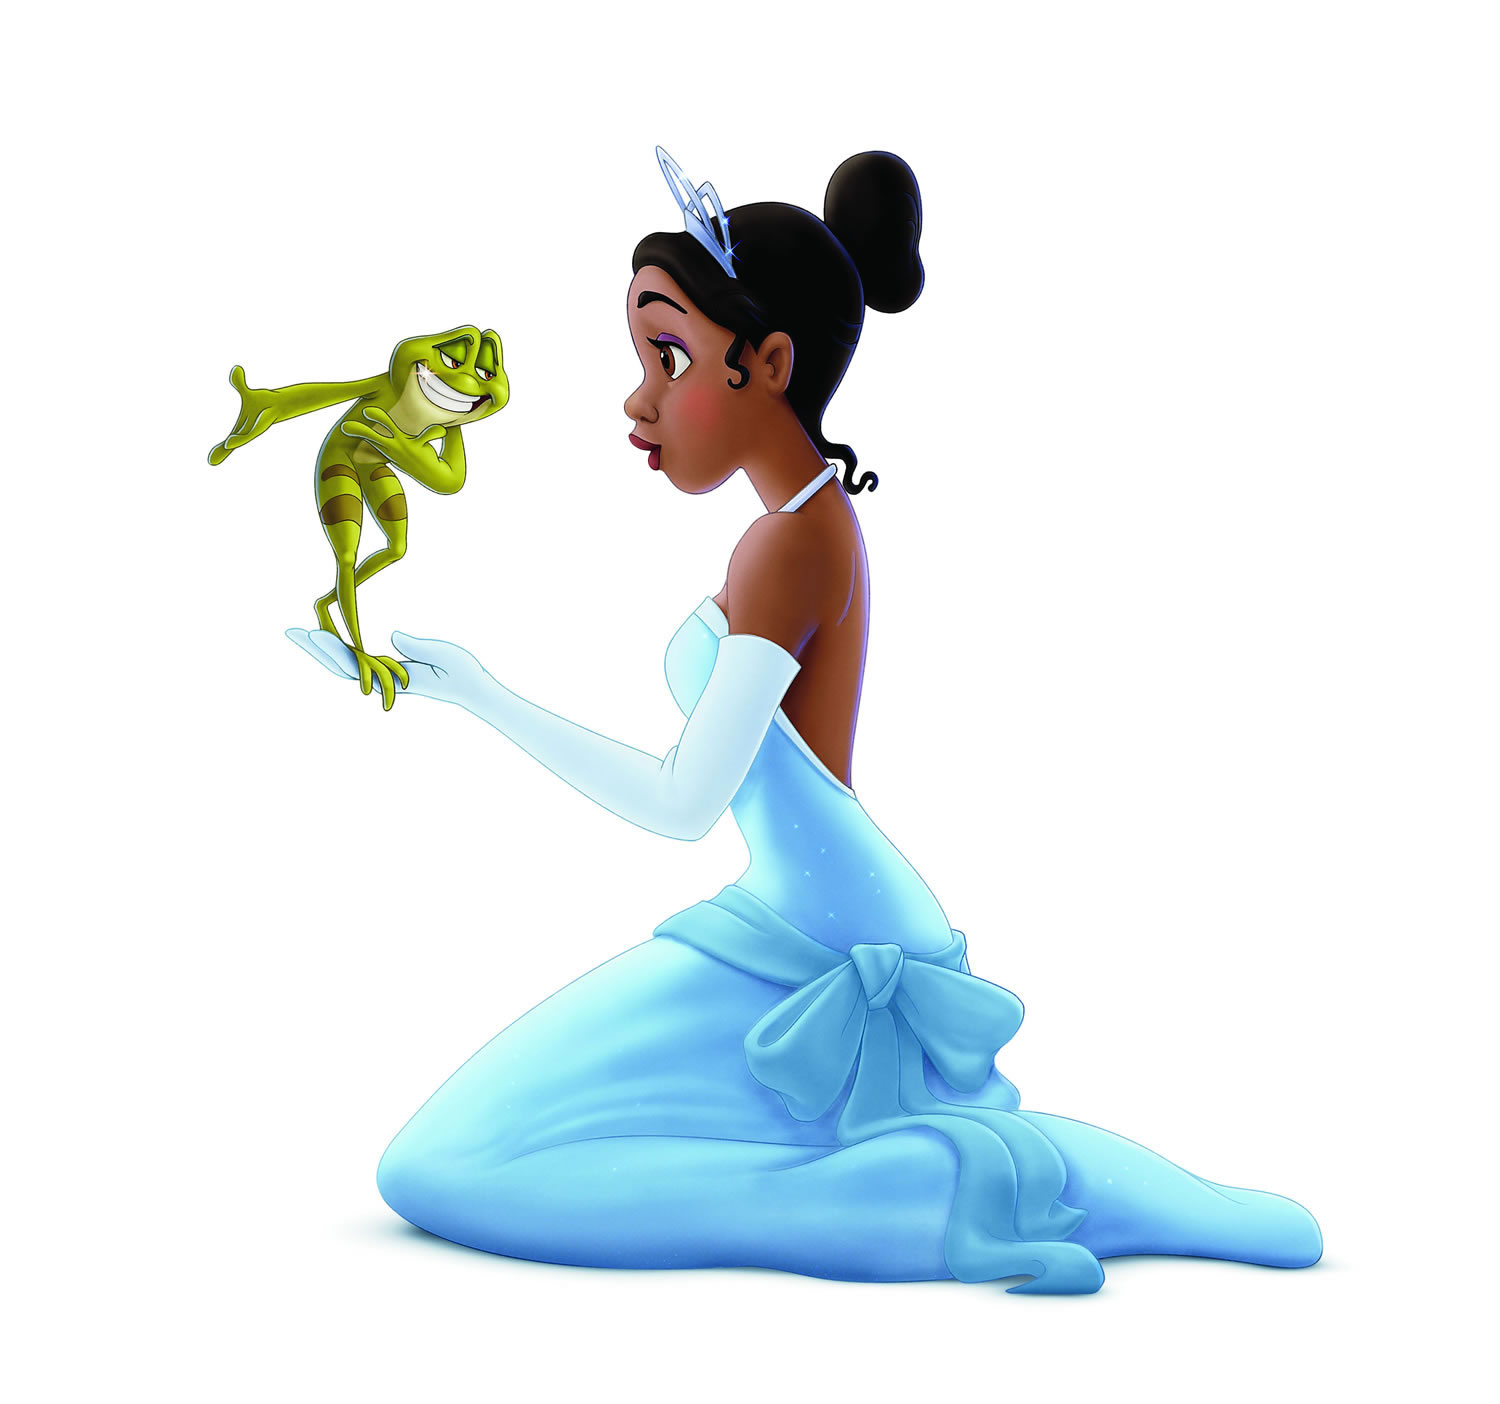 Naveen the Frog and Tiana from Disney’s Princess and the Frog Wallpaper.